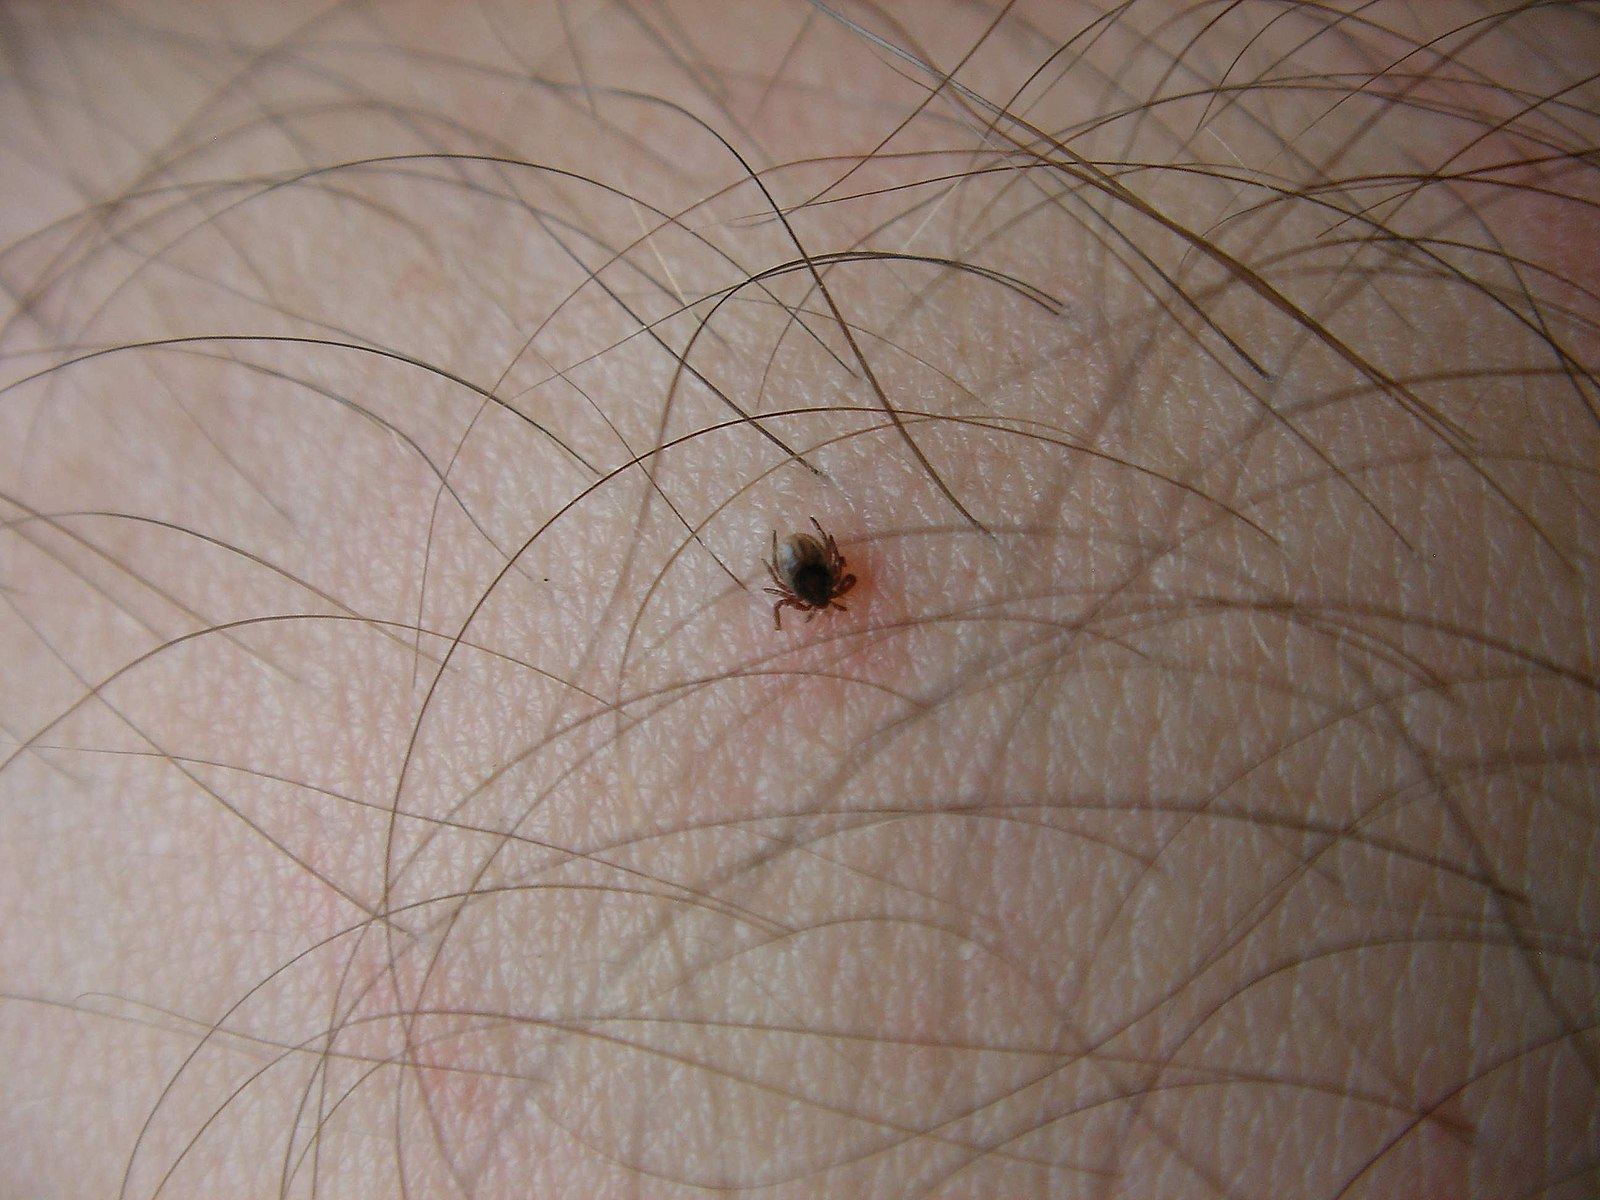 These are the 5 places where you risk getting bitten by a tick

